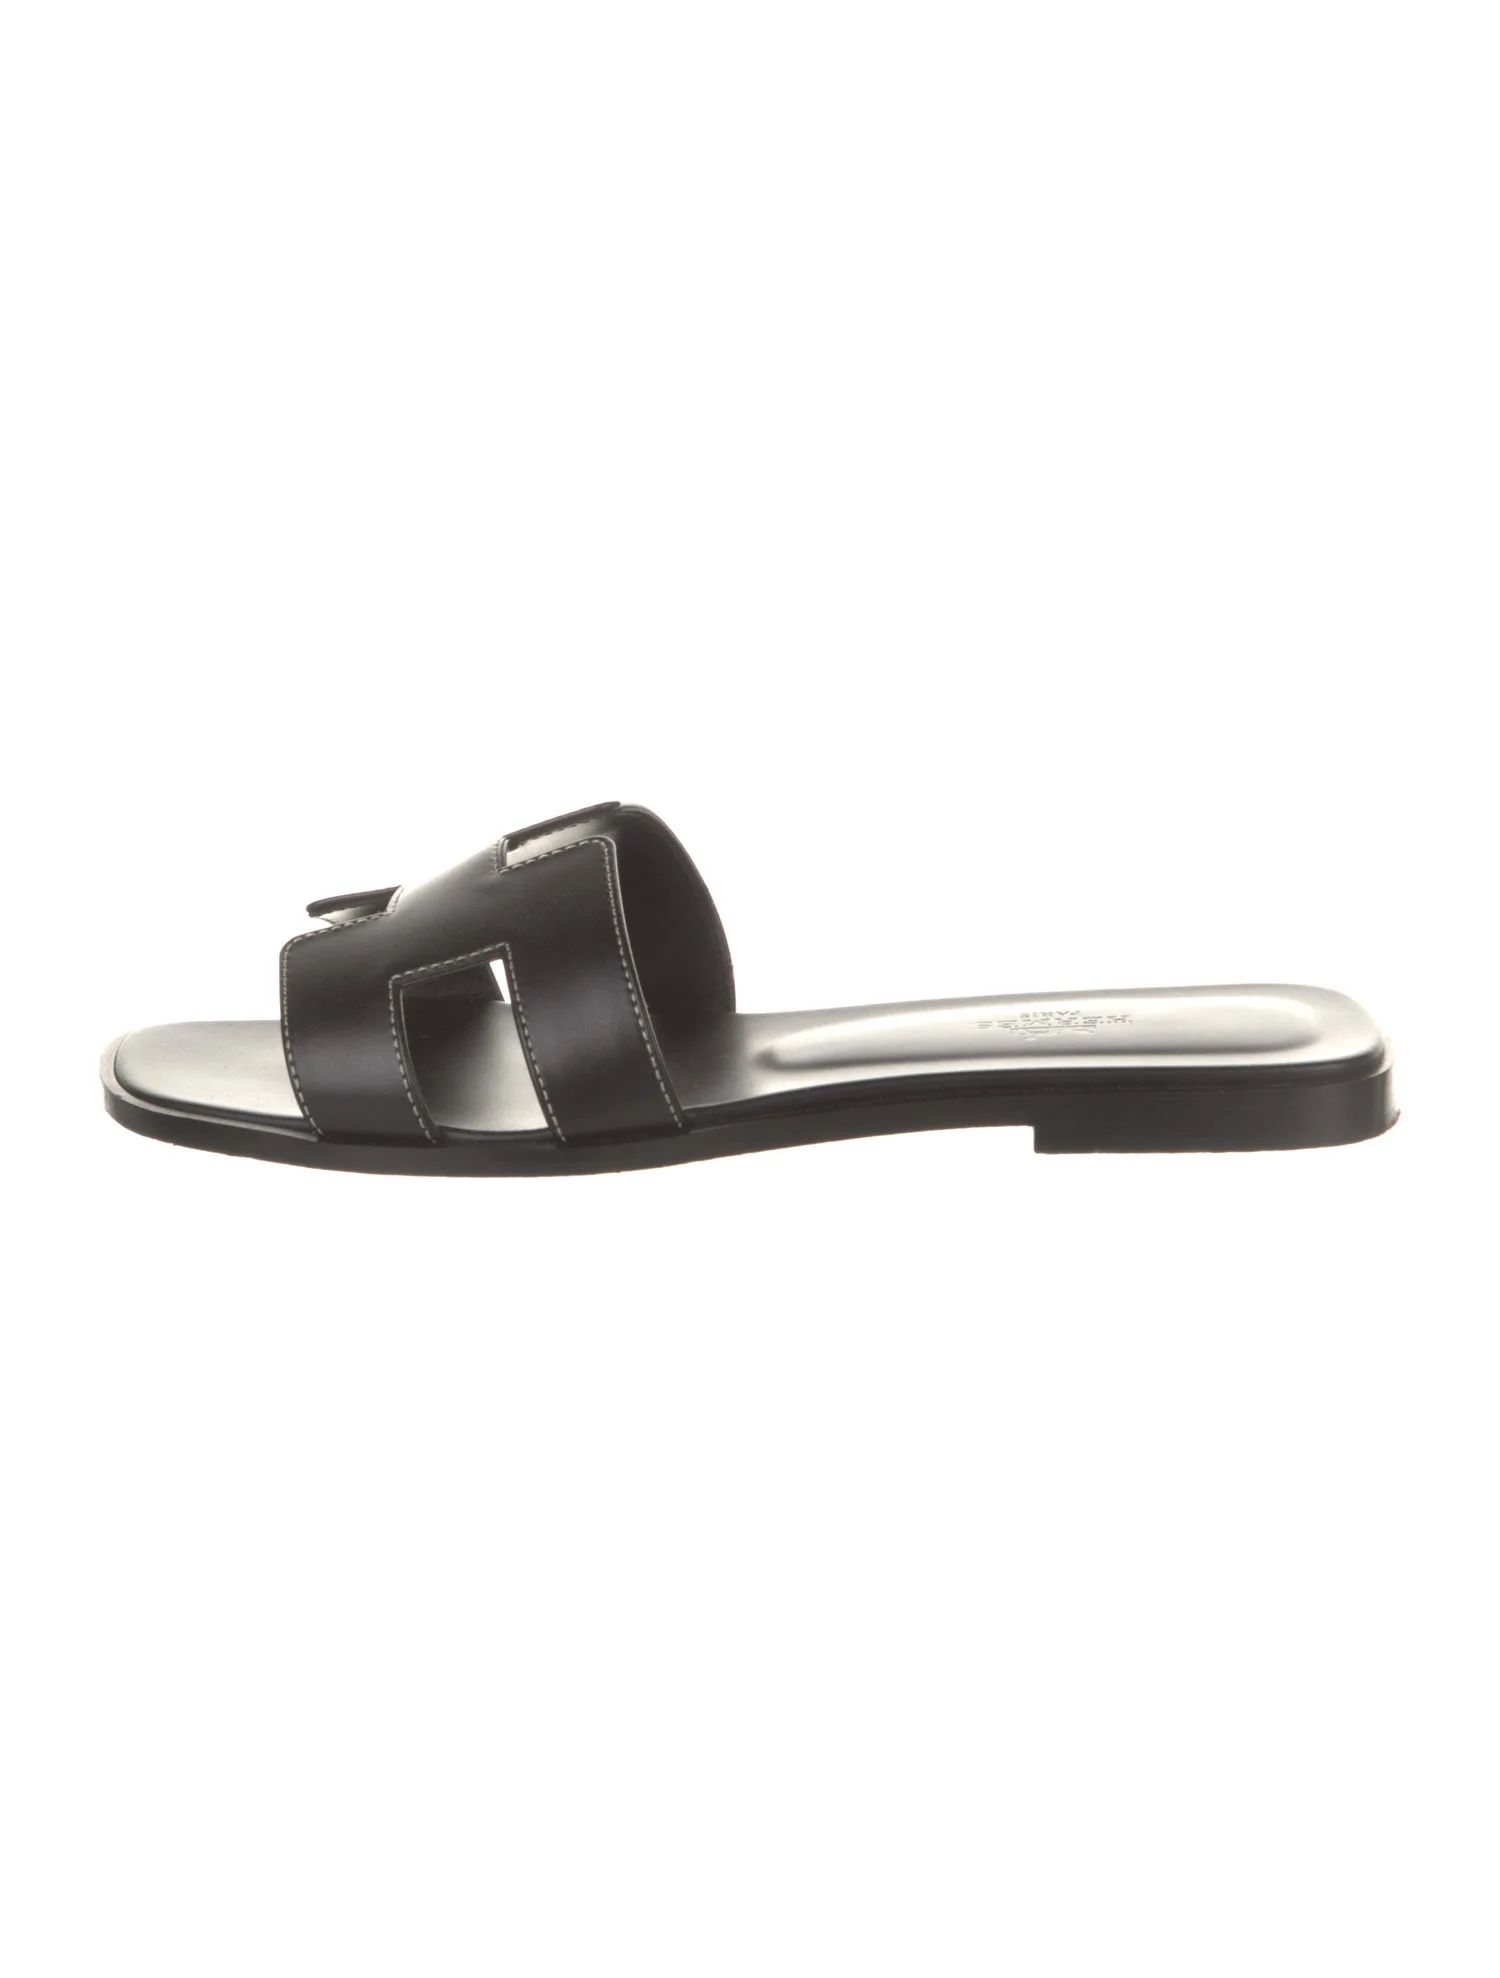 Oran Leather Leather Slides | The RealReal